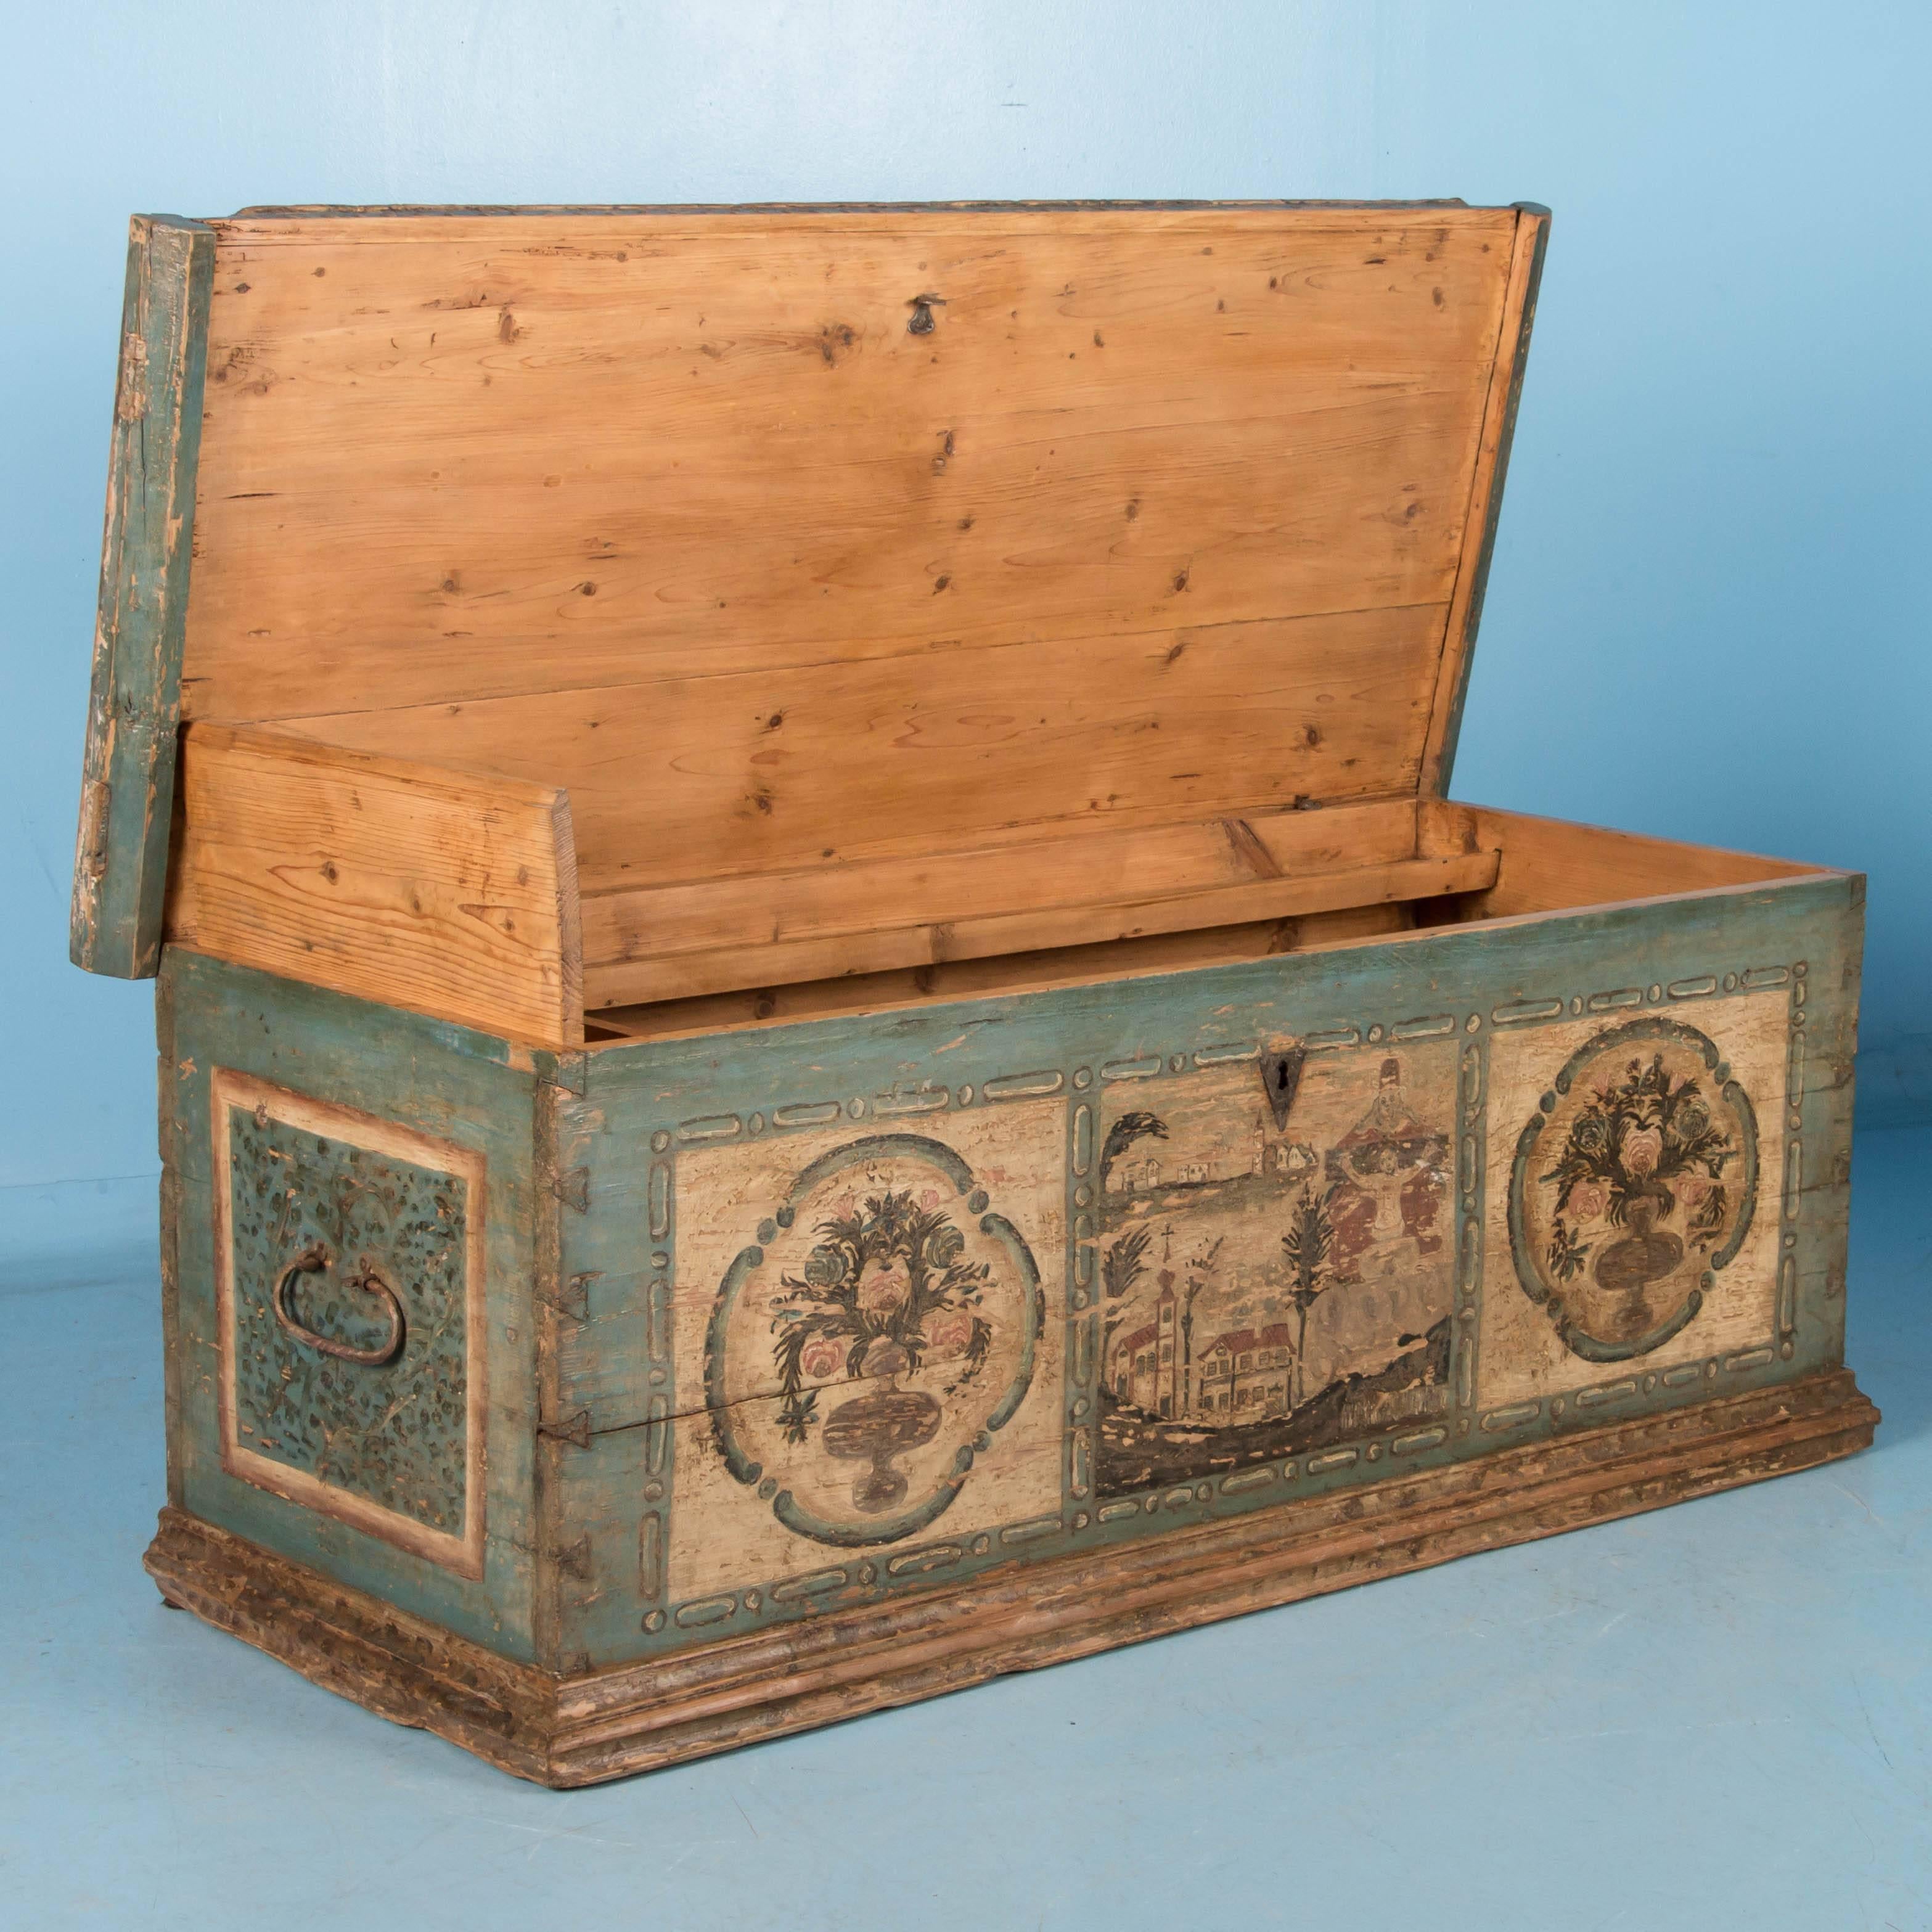 The original paint and details in this trunk are exceptional. The front of the trunk depicts a village scene and stylized vases of flowers in muted colors, set against a soft blue background. Inside is a shallow tray and a small utility box with a